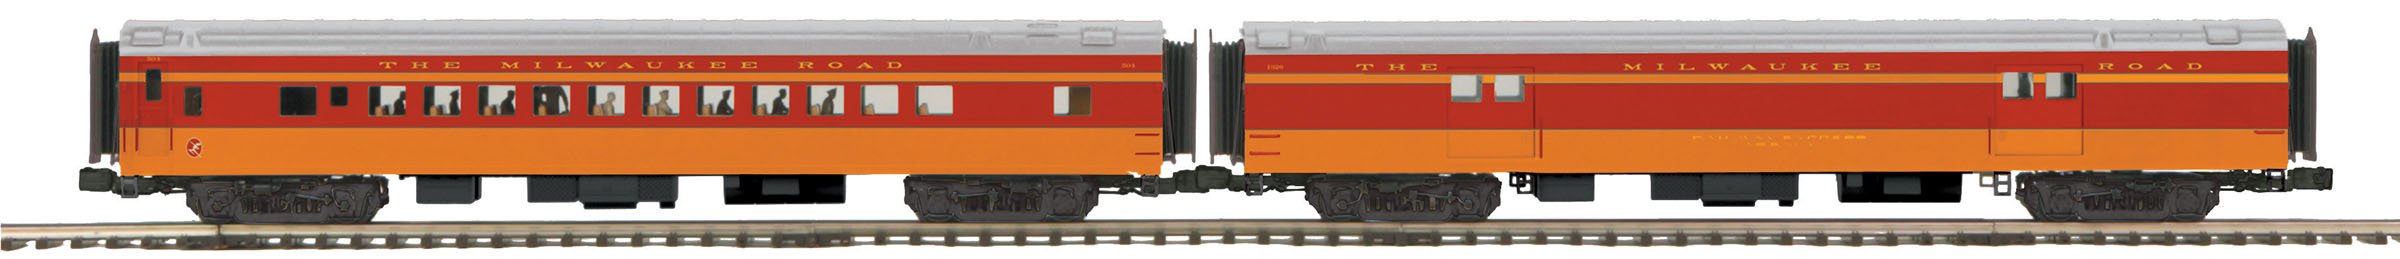 MTH 20-64165 Milwaukee Road 2-Car 70' Streamlined Baggage/Coach Passenger Set (Smooth Sided) 